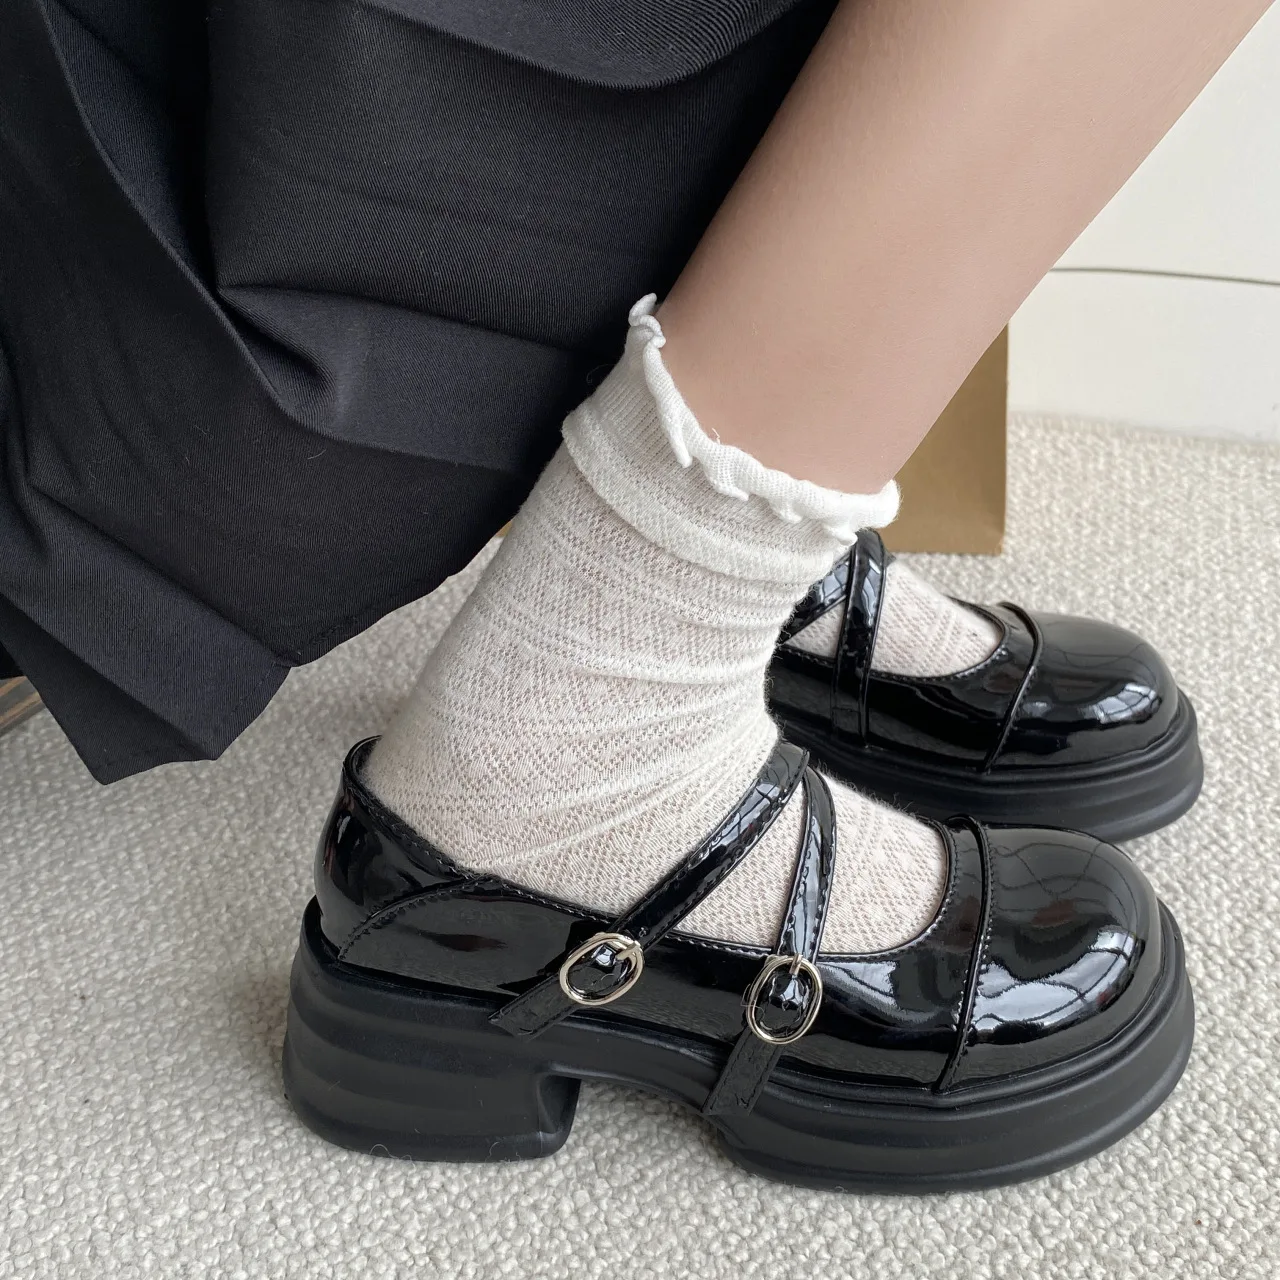 

Shoes Woman Flats Round Toe British Style Oxfords Clogs Platform Casual Female Sneakers Shallow Mouth Modis Dress Preppy New Lea